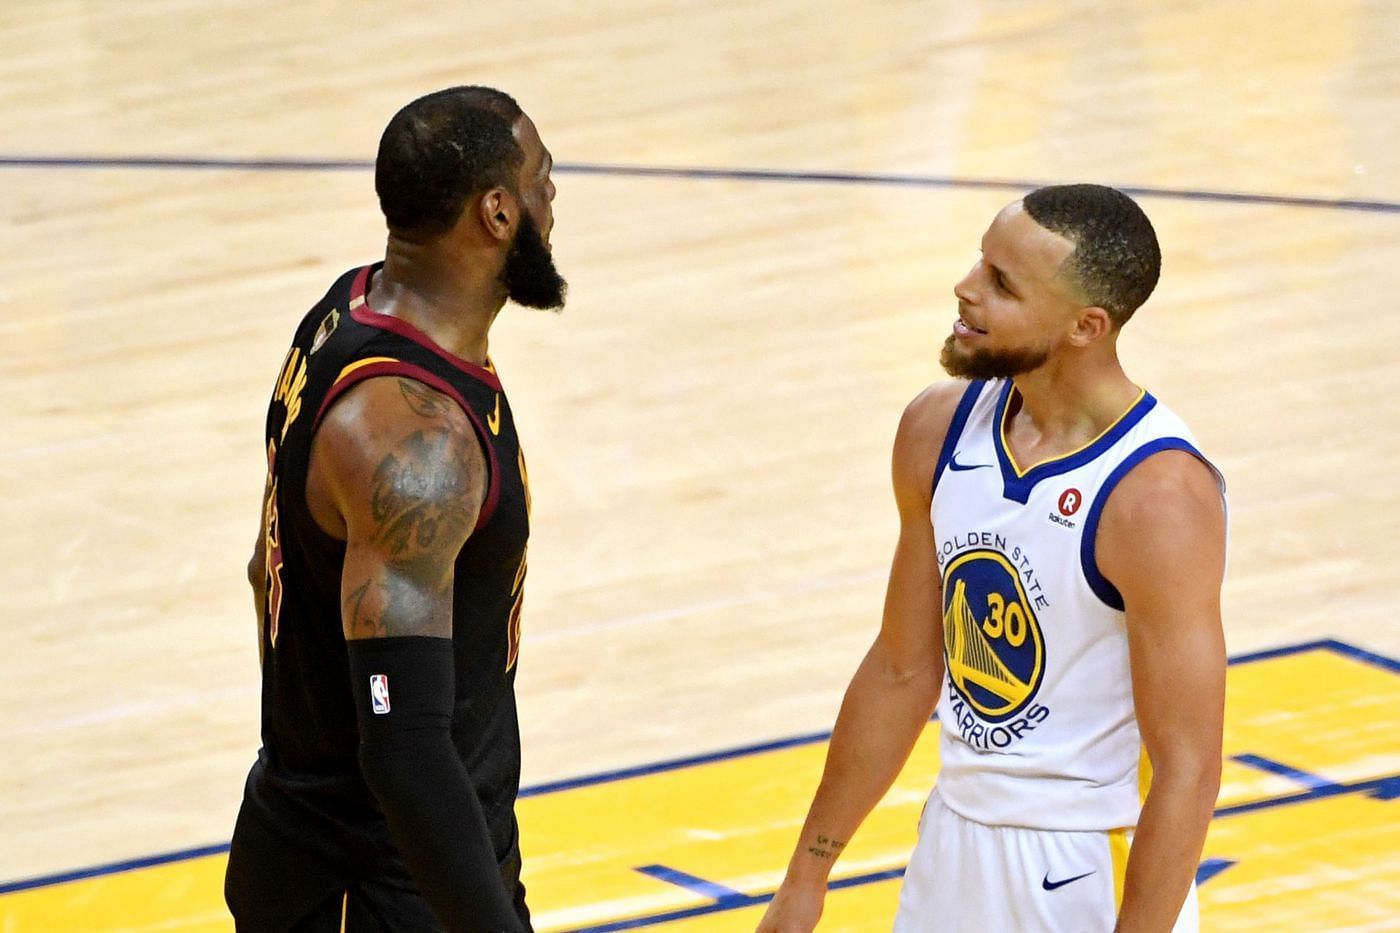 Former Cleveland Cavaliers superstar forward LeBron James and Golden State Warriors superstar point guard Steph Curry